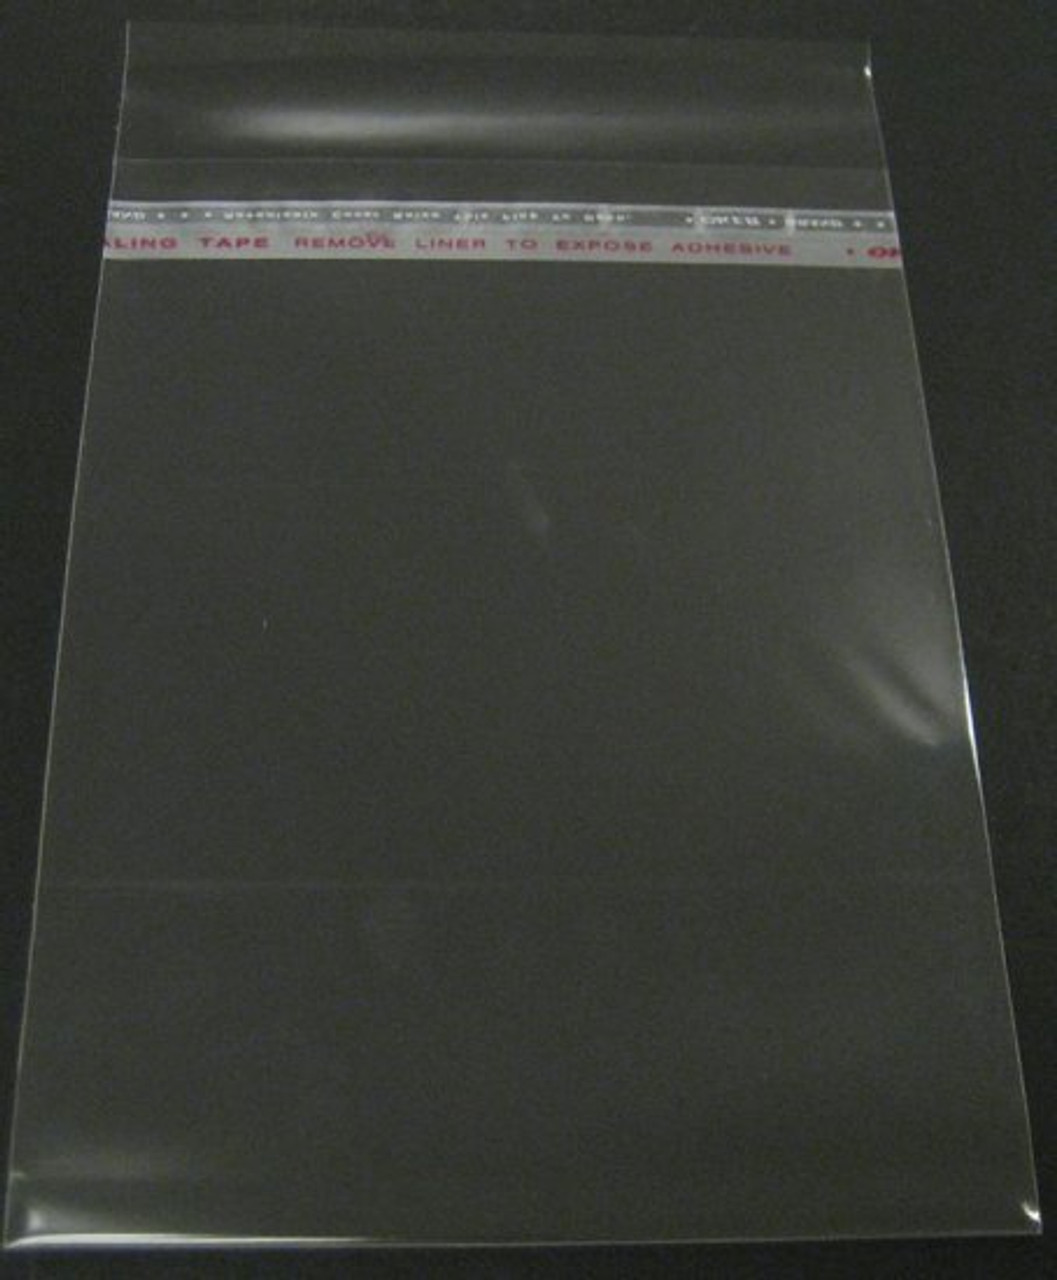 Flap Seal Bags for 8.5x11 or 9x12 Photos and Art